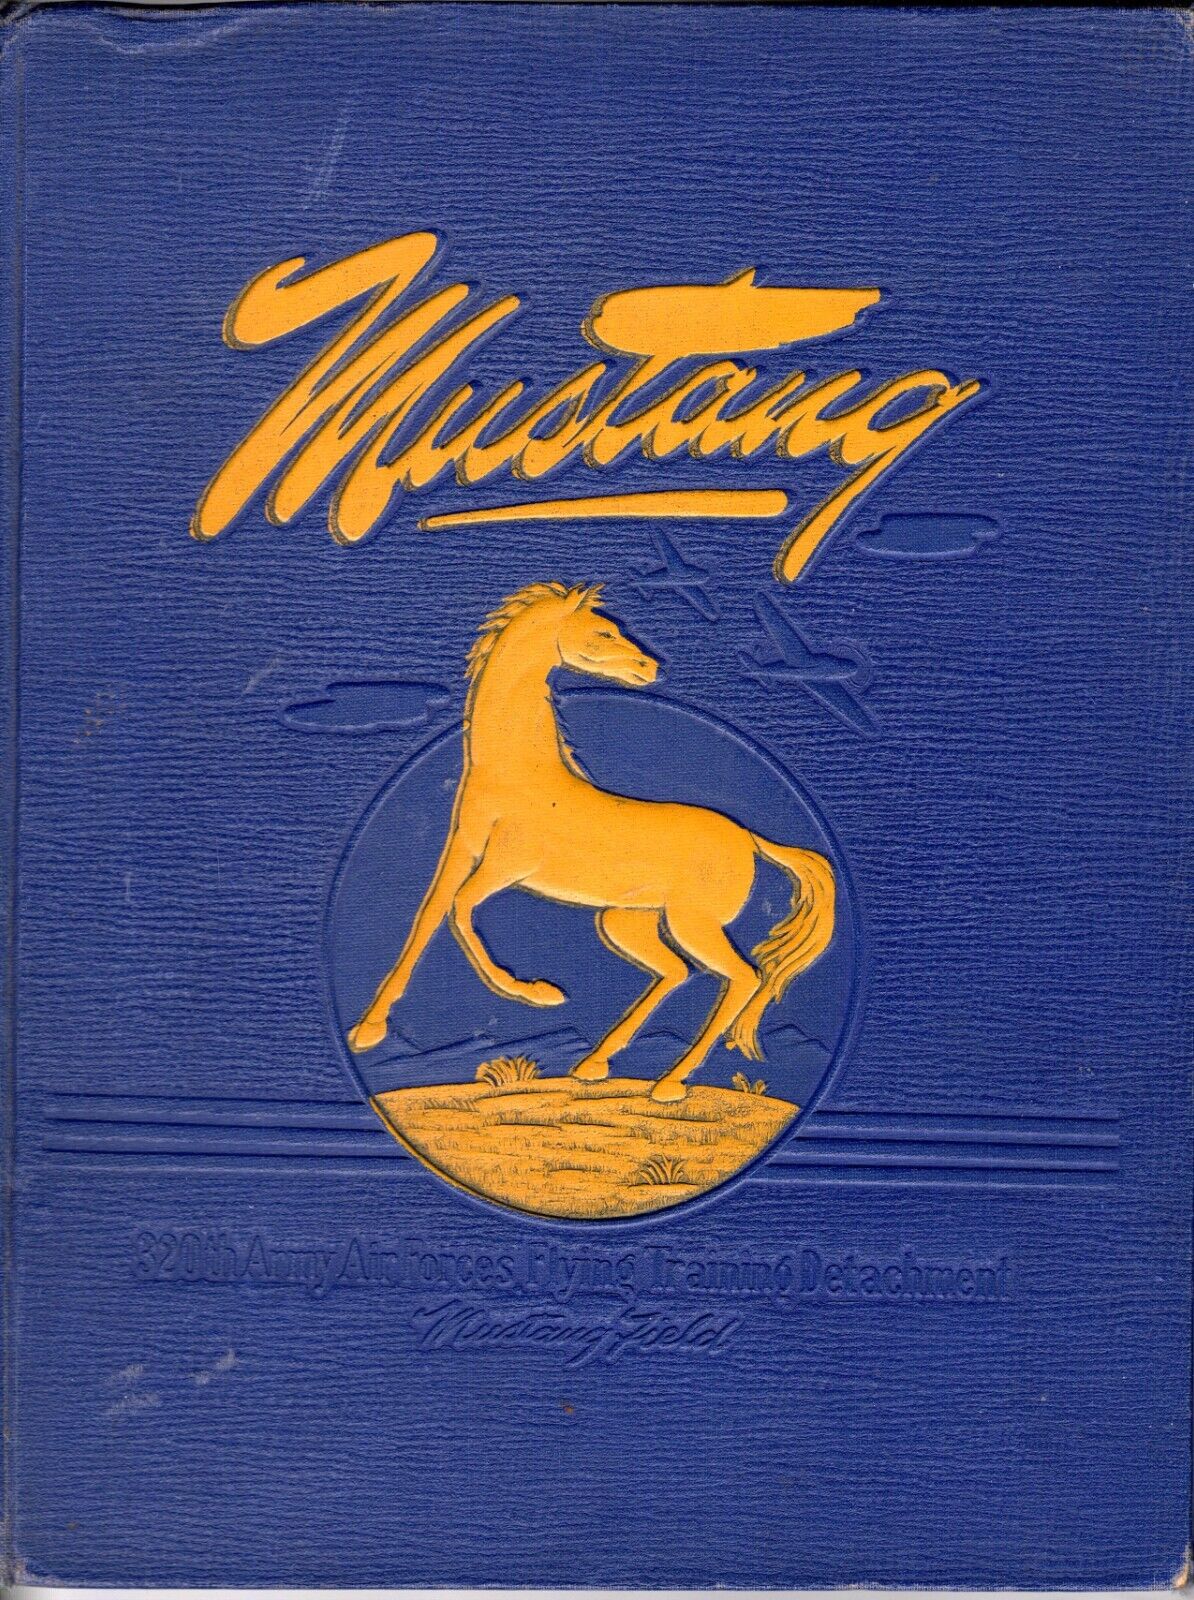 320th Army Air Force Flying Training Detachment Yearbook 44A MUSTANG FIELD 1944